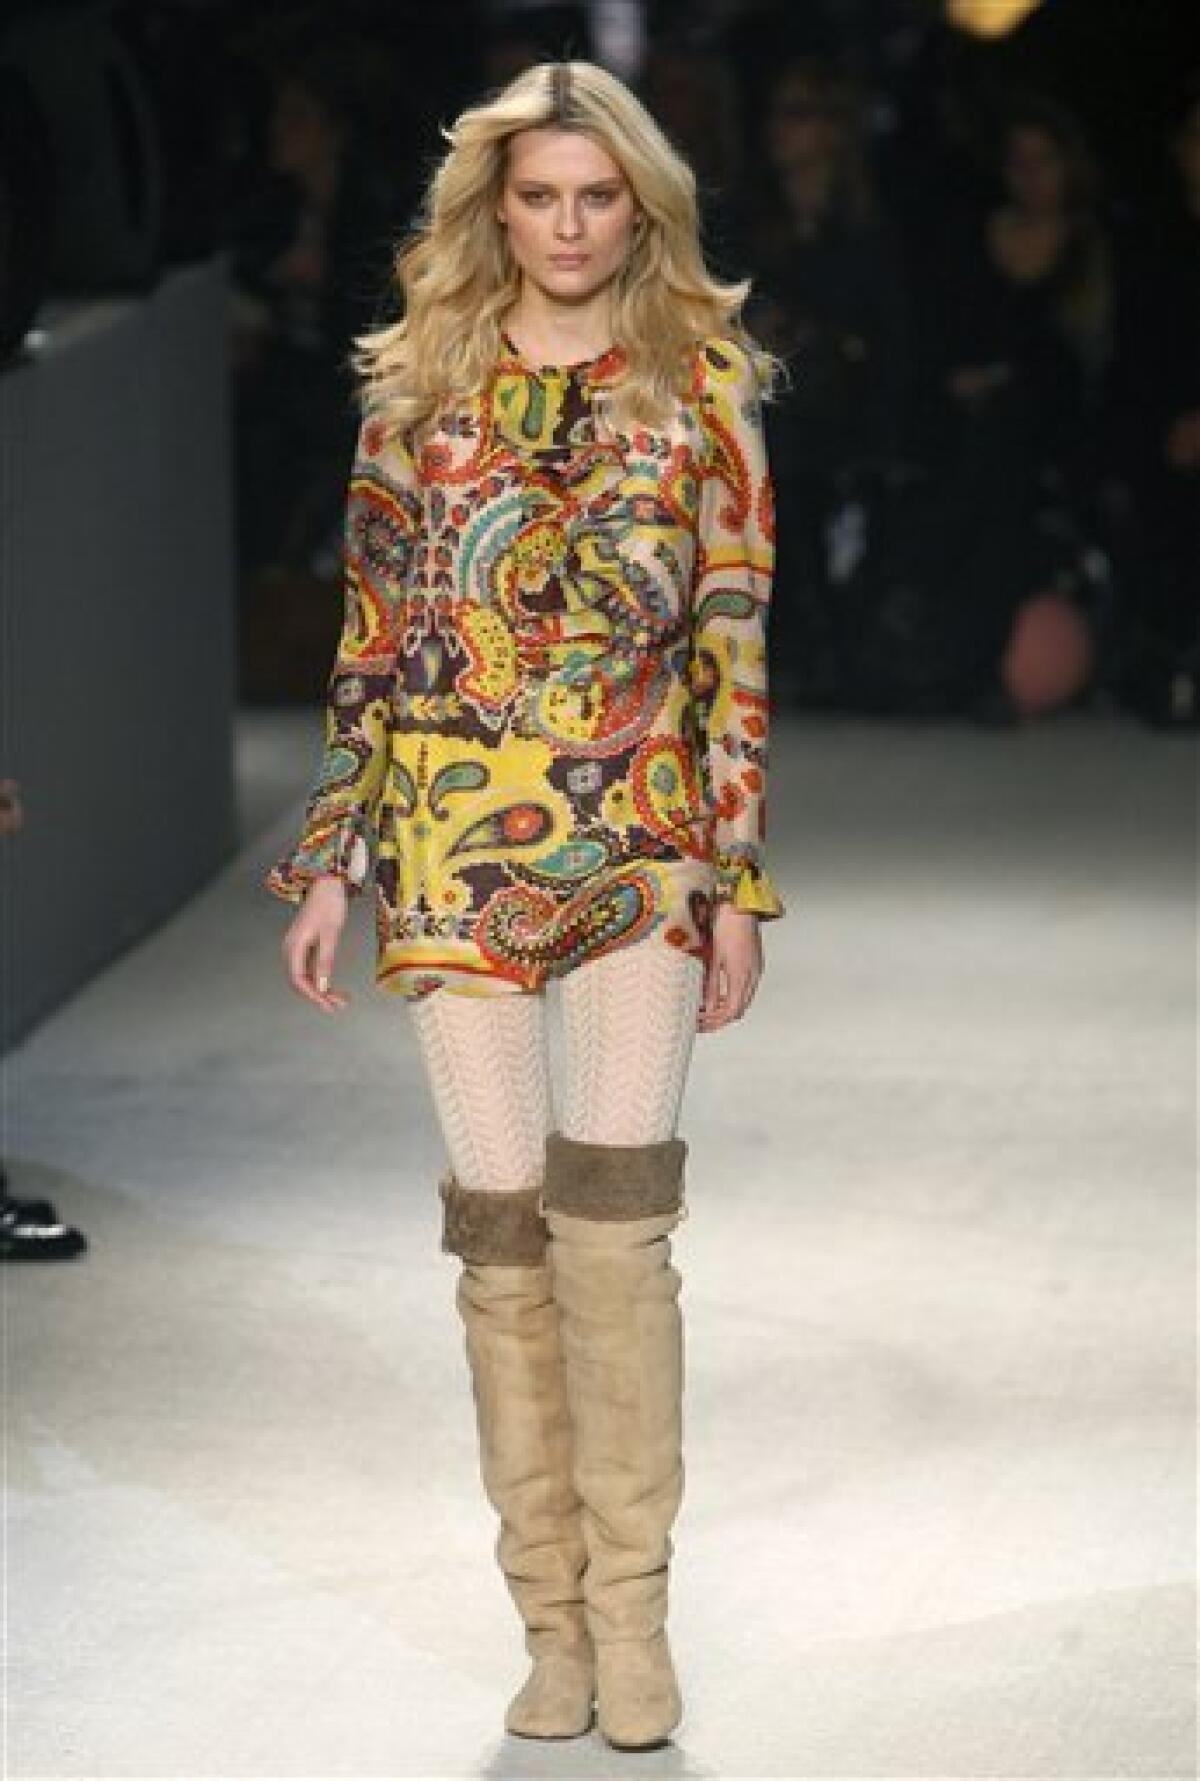 Louis Vuitton Fall 2010 Ready-to-Wear collection, runway looks, beauty,  models, and reviews.